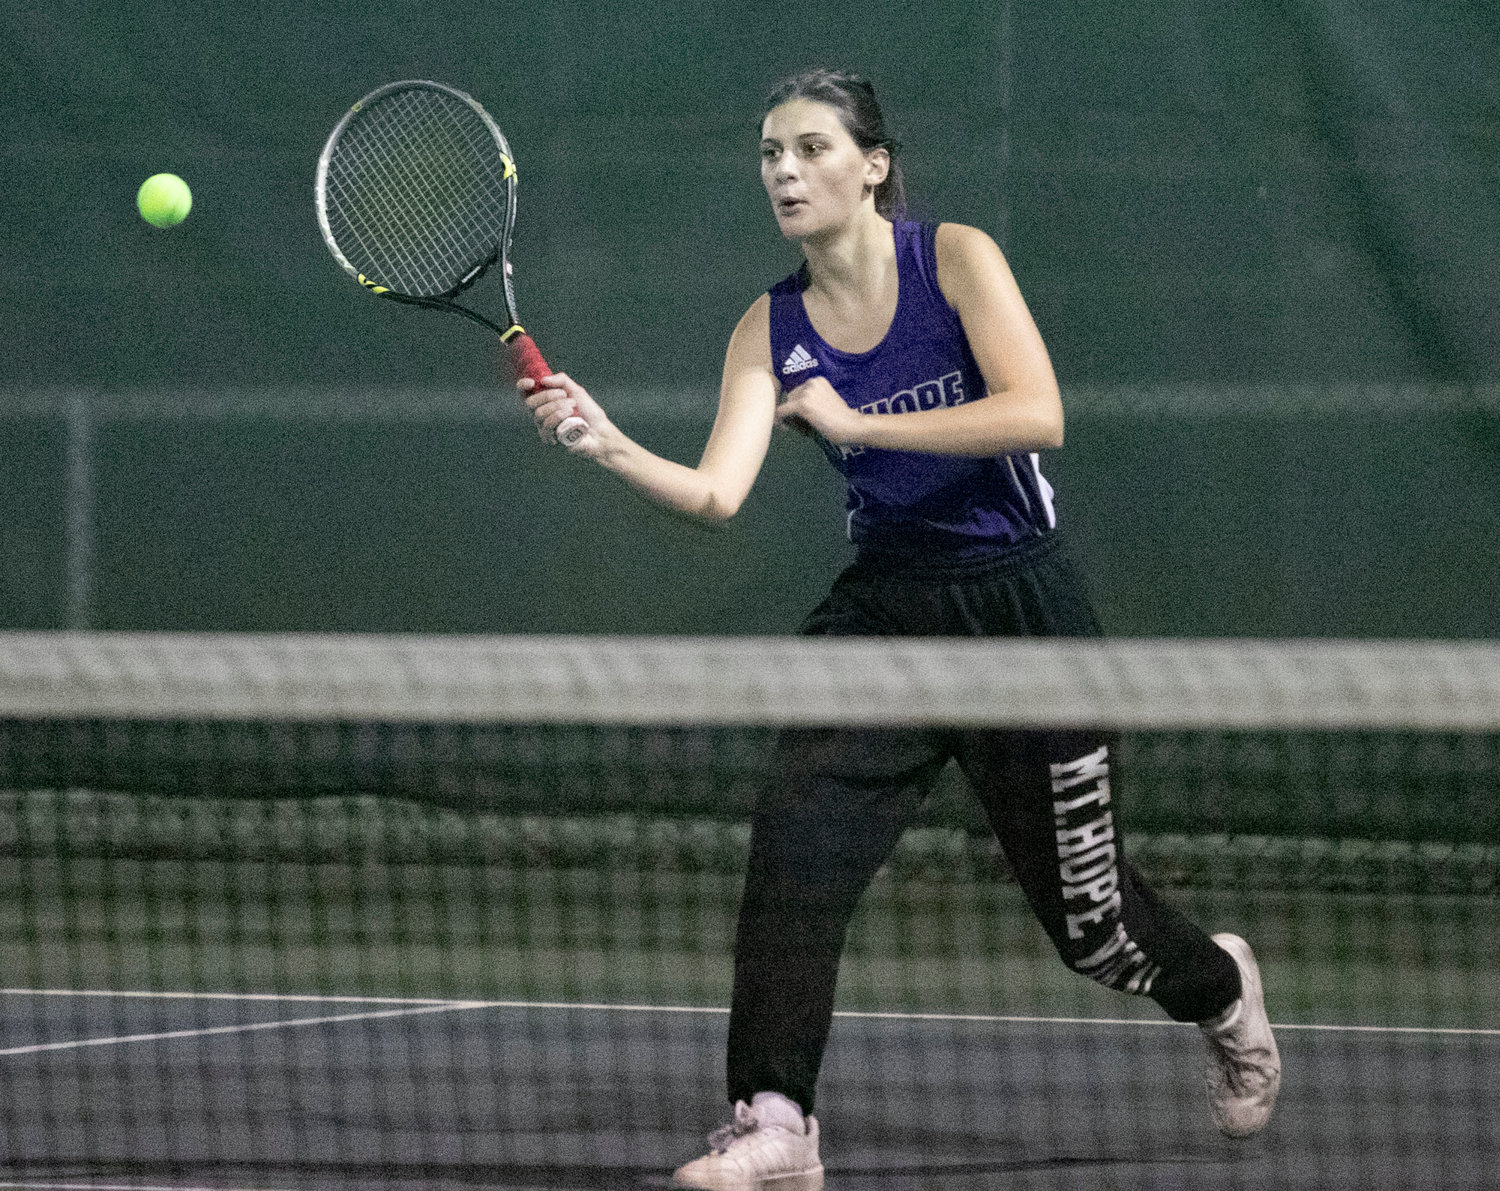 Emily Marino volleys a shot for a winner during the first doubles match.